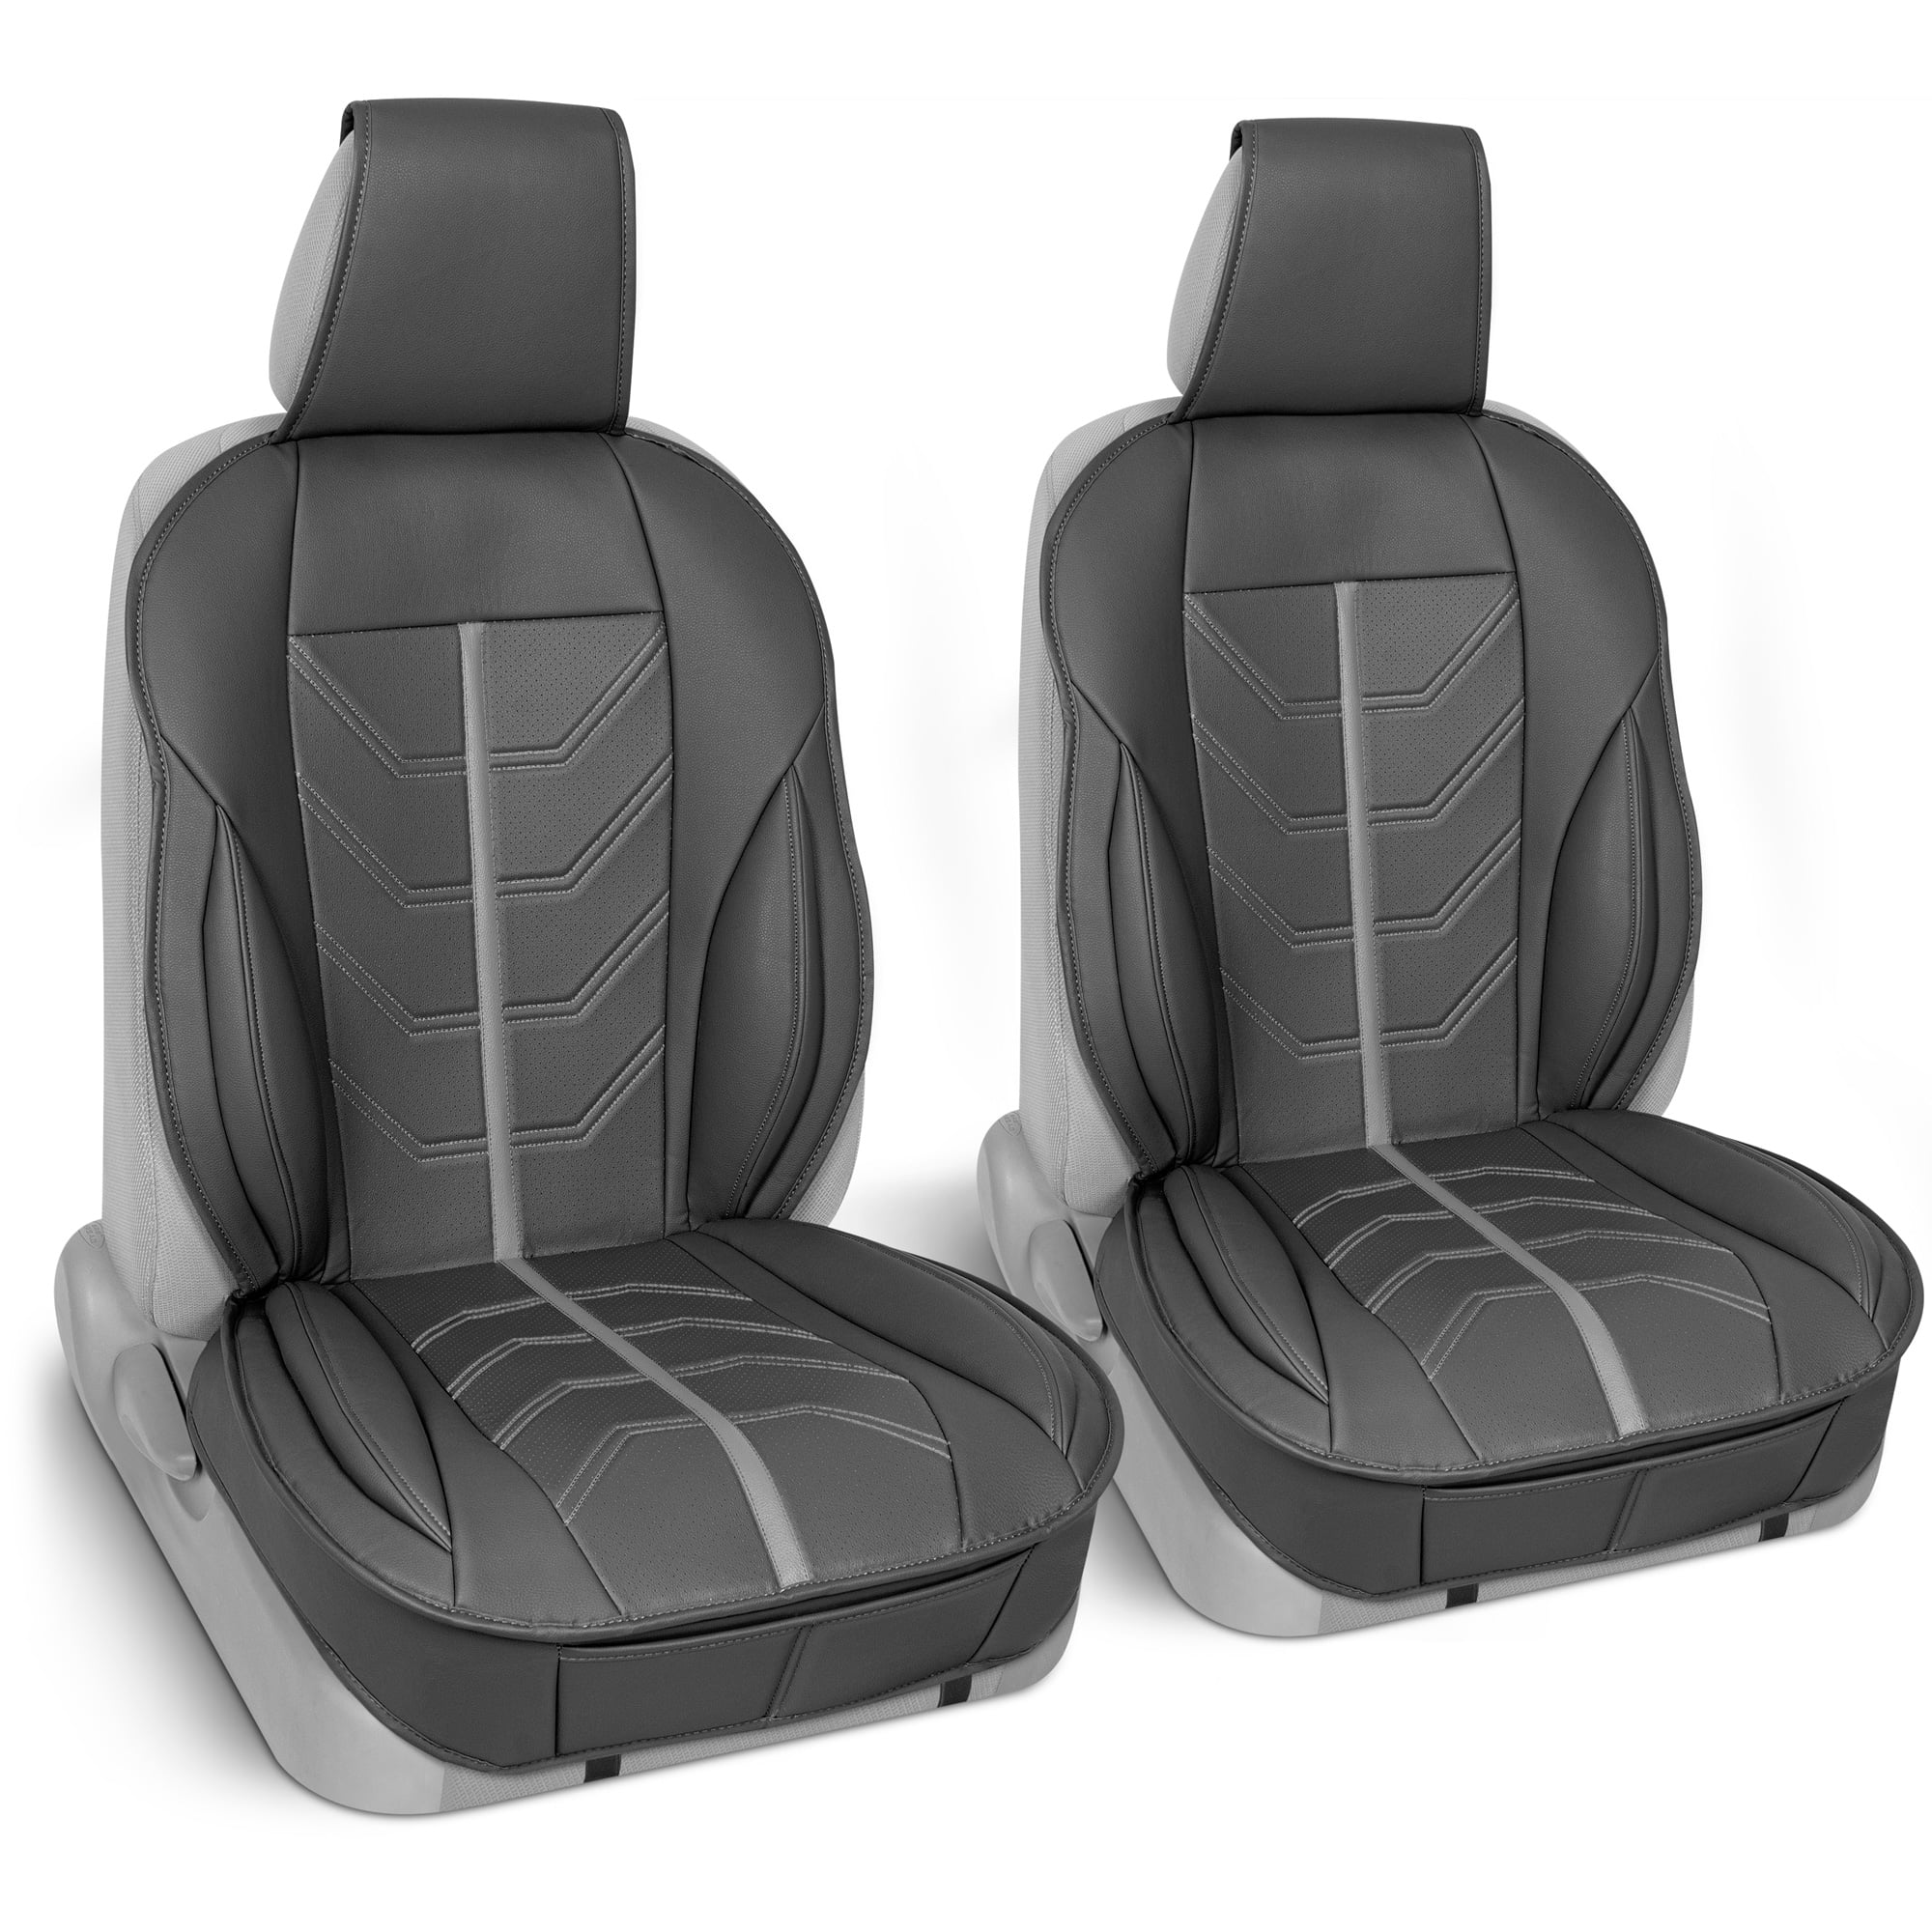 Motor Trend ComfortDrive Deluxe Faux Leather Front Seat Covers for Car Truck  Van & SUV, 2 Piece Set Red – Premium Ergonomic Padded Seat Cover Cushions  for Front Seats with Extended Coverage 